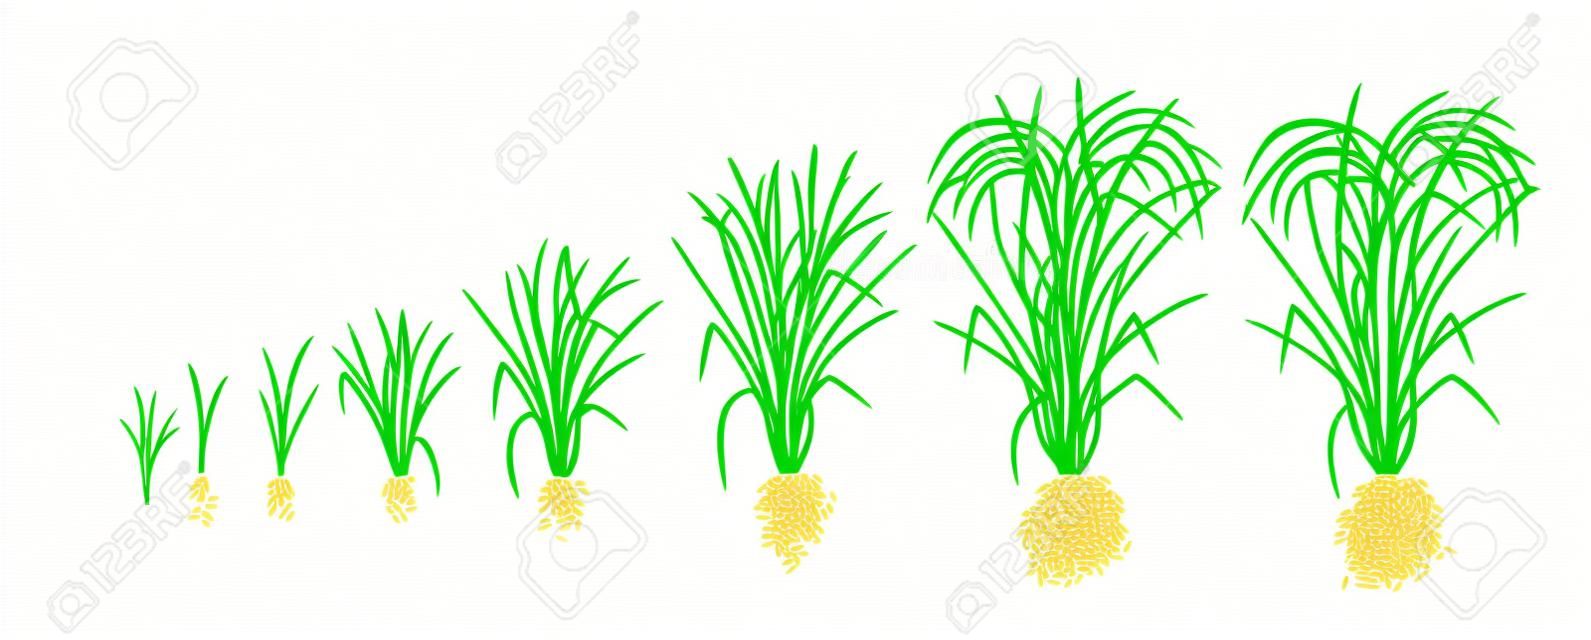 Growth stages of rice plant. Rice increase phases. Vector illustration. Oryza sativa. Ripening period. The life cycle. Use fertilizers. On white background. It is the agricultural commodity with the third-highest worldwide production.